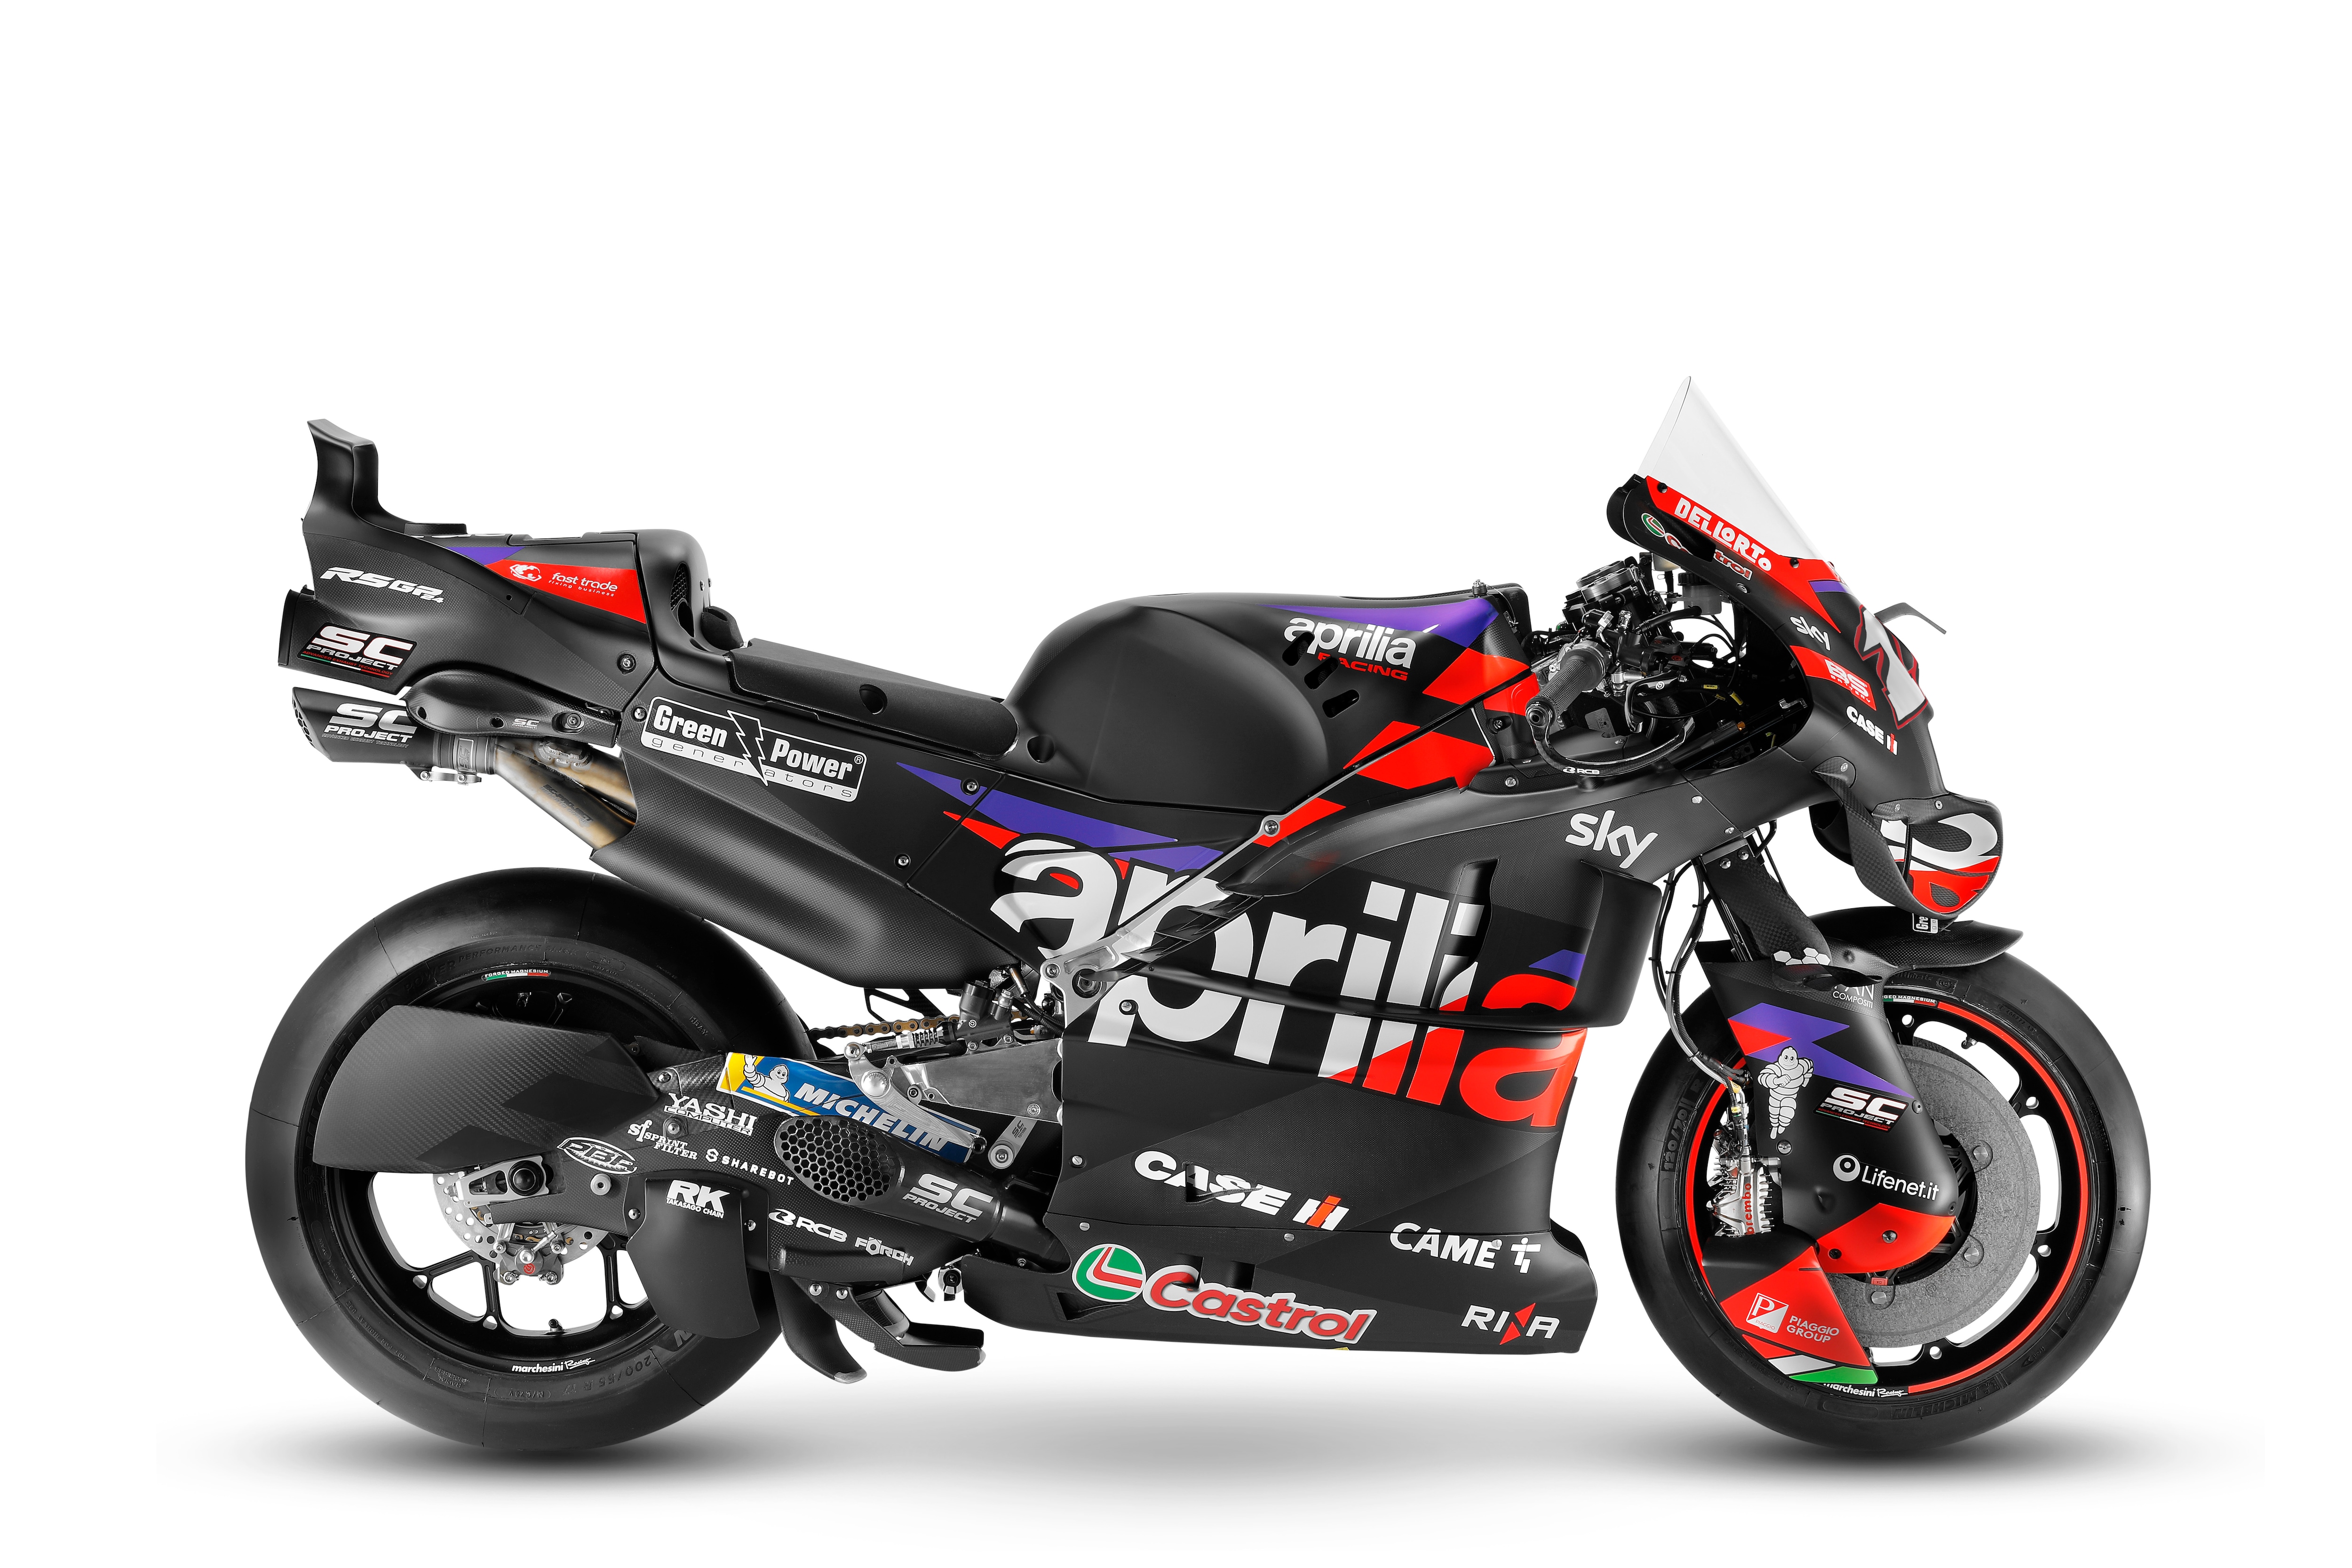 The Aprilia RSGP 24 race bike has received improvements in aerodynamics with the team bringing new innovations 